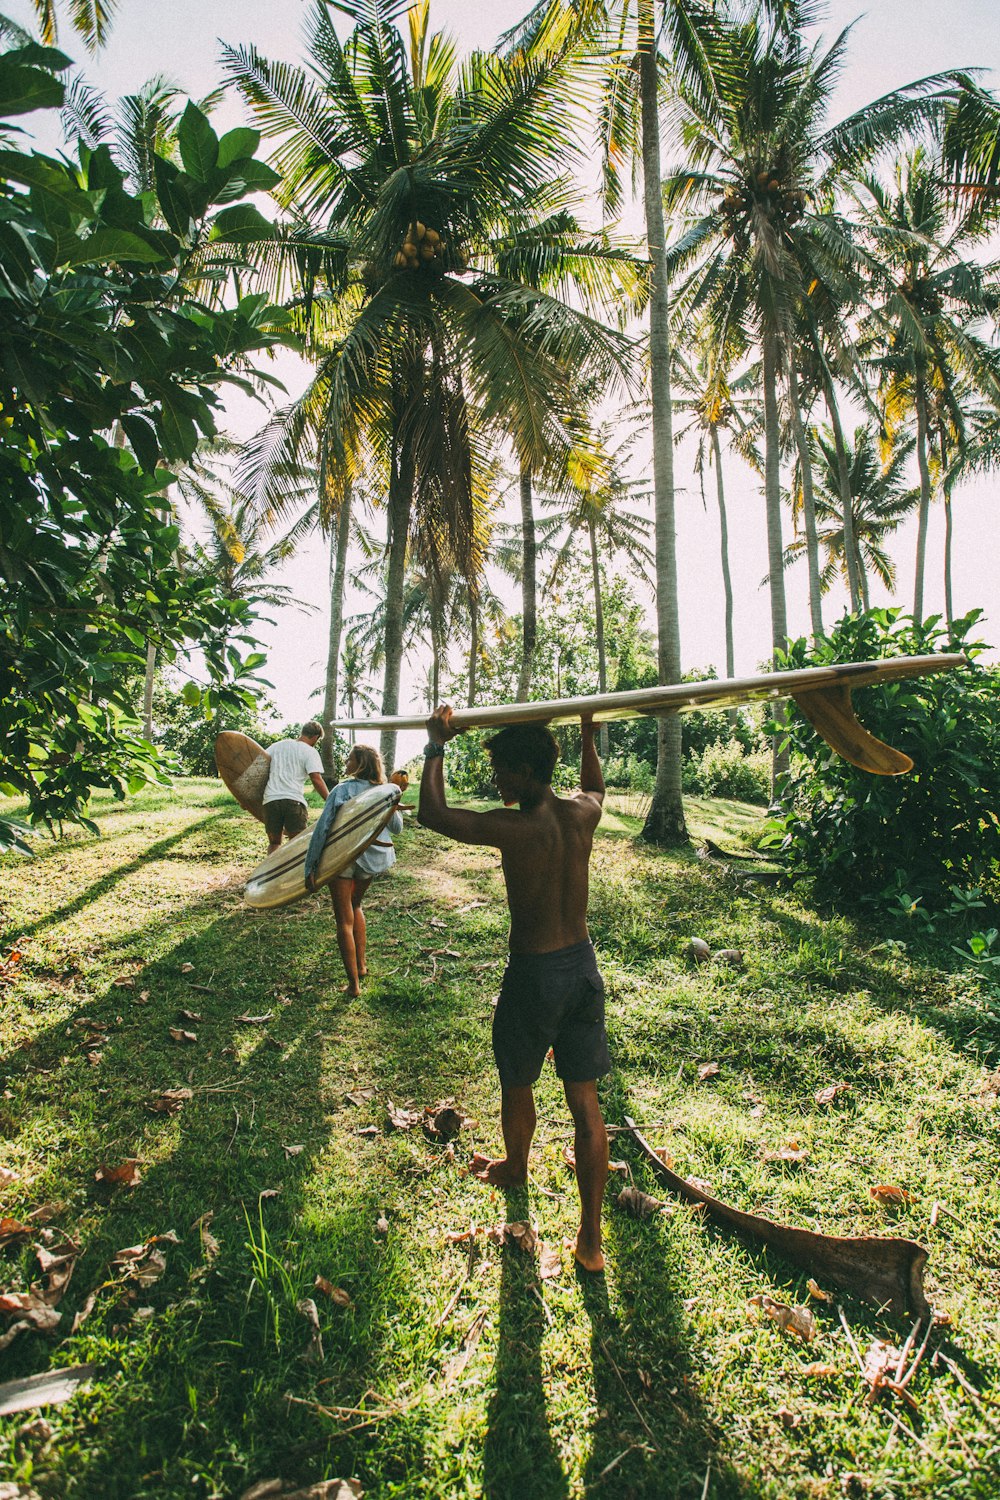 a man holding a surfboard over his head